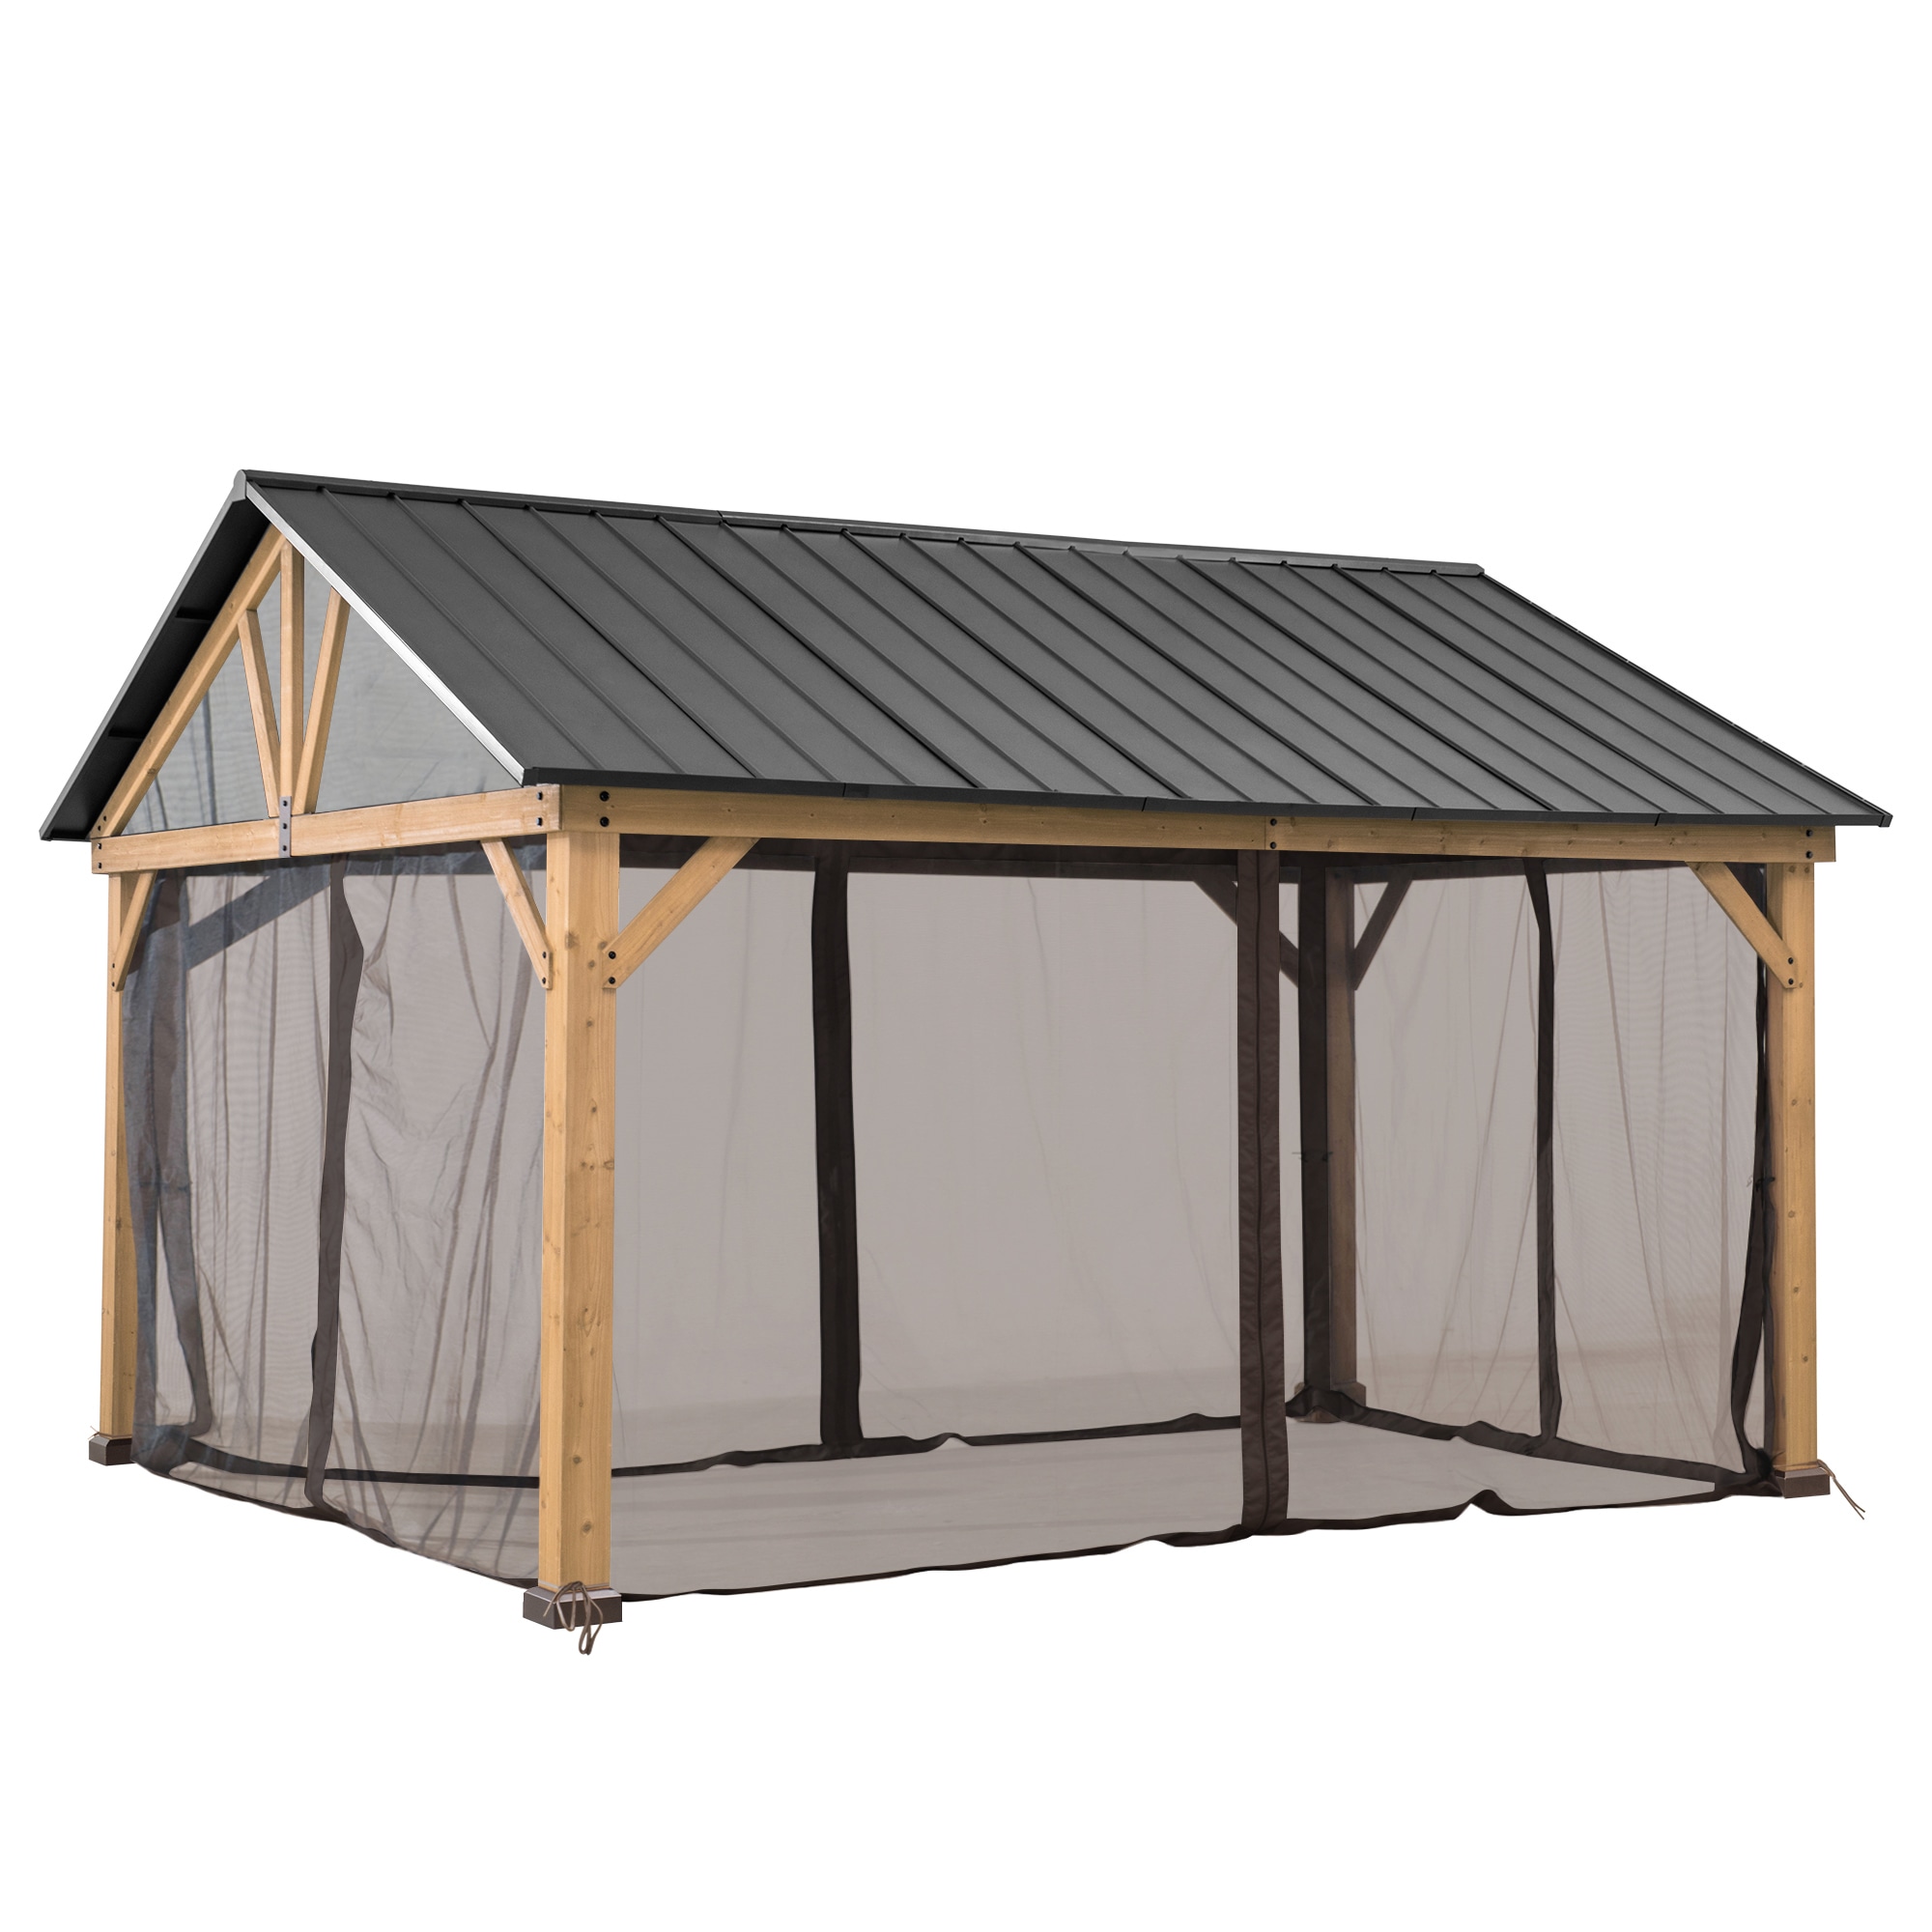 Paddock drainage grass grids log cabins greenhouses field shelters storage barns 